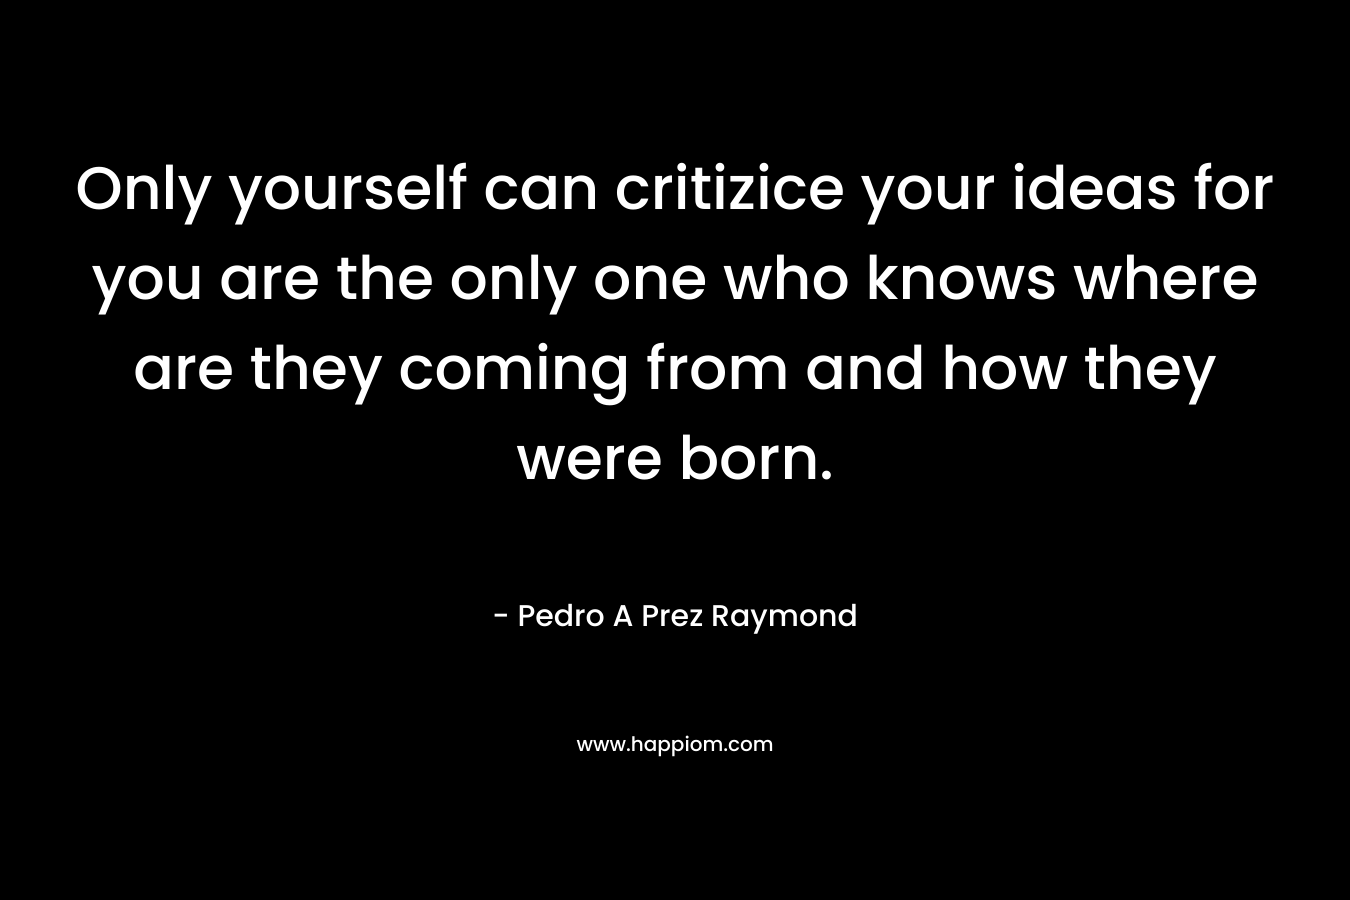 Only yourself can critizice your ideas for you are the only one who knows where are they coming from and how they were born.